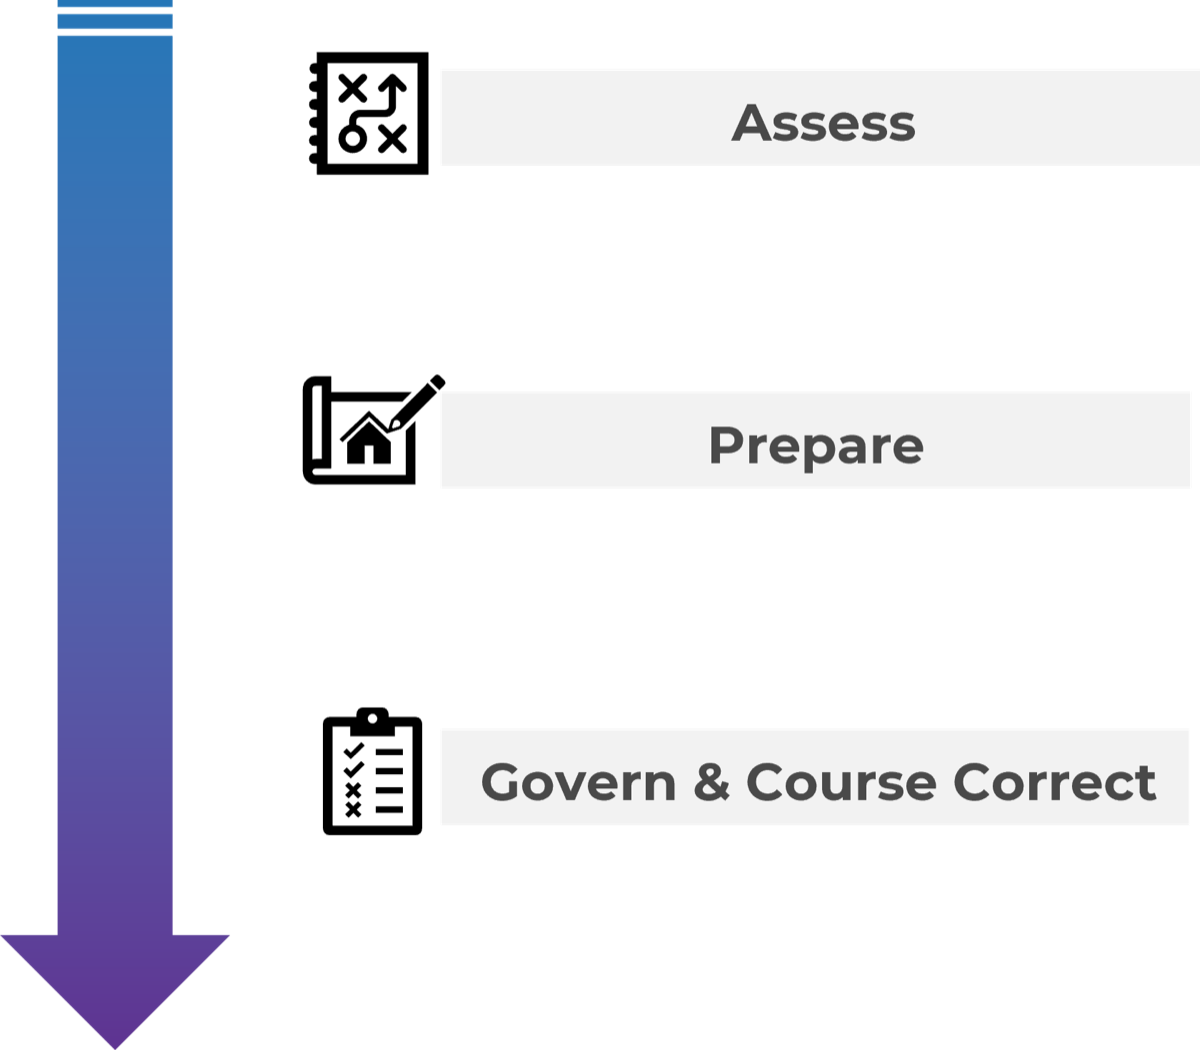 The three phases of software implementation: 'Assess', 'Prepare', 'Govern & Course Correct'.